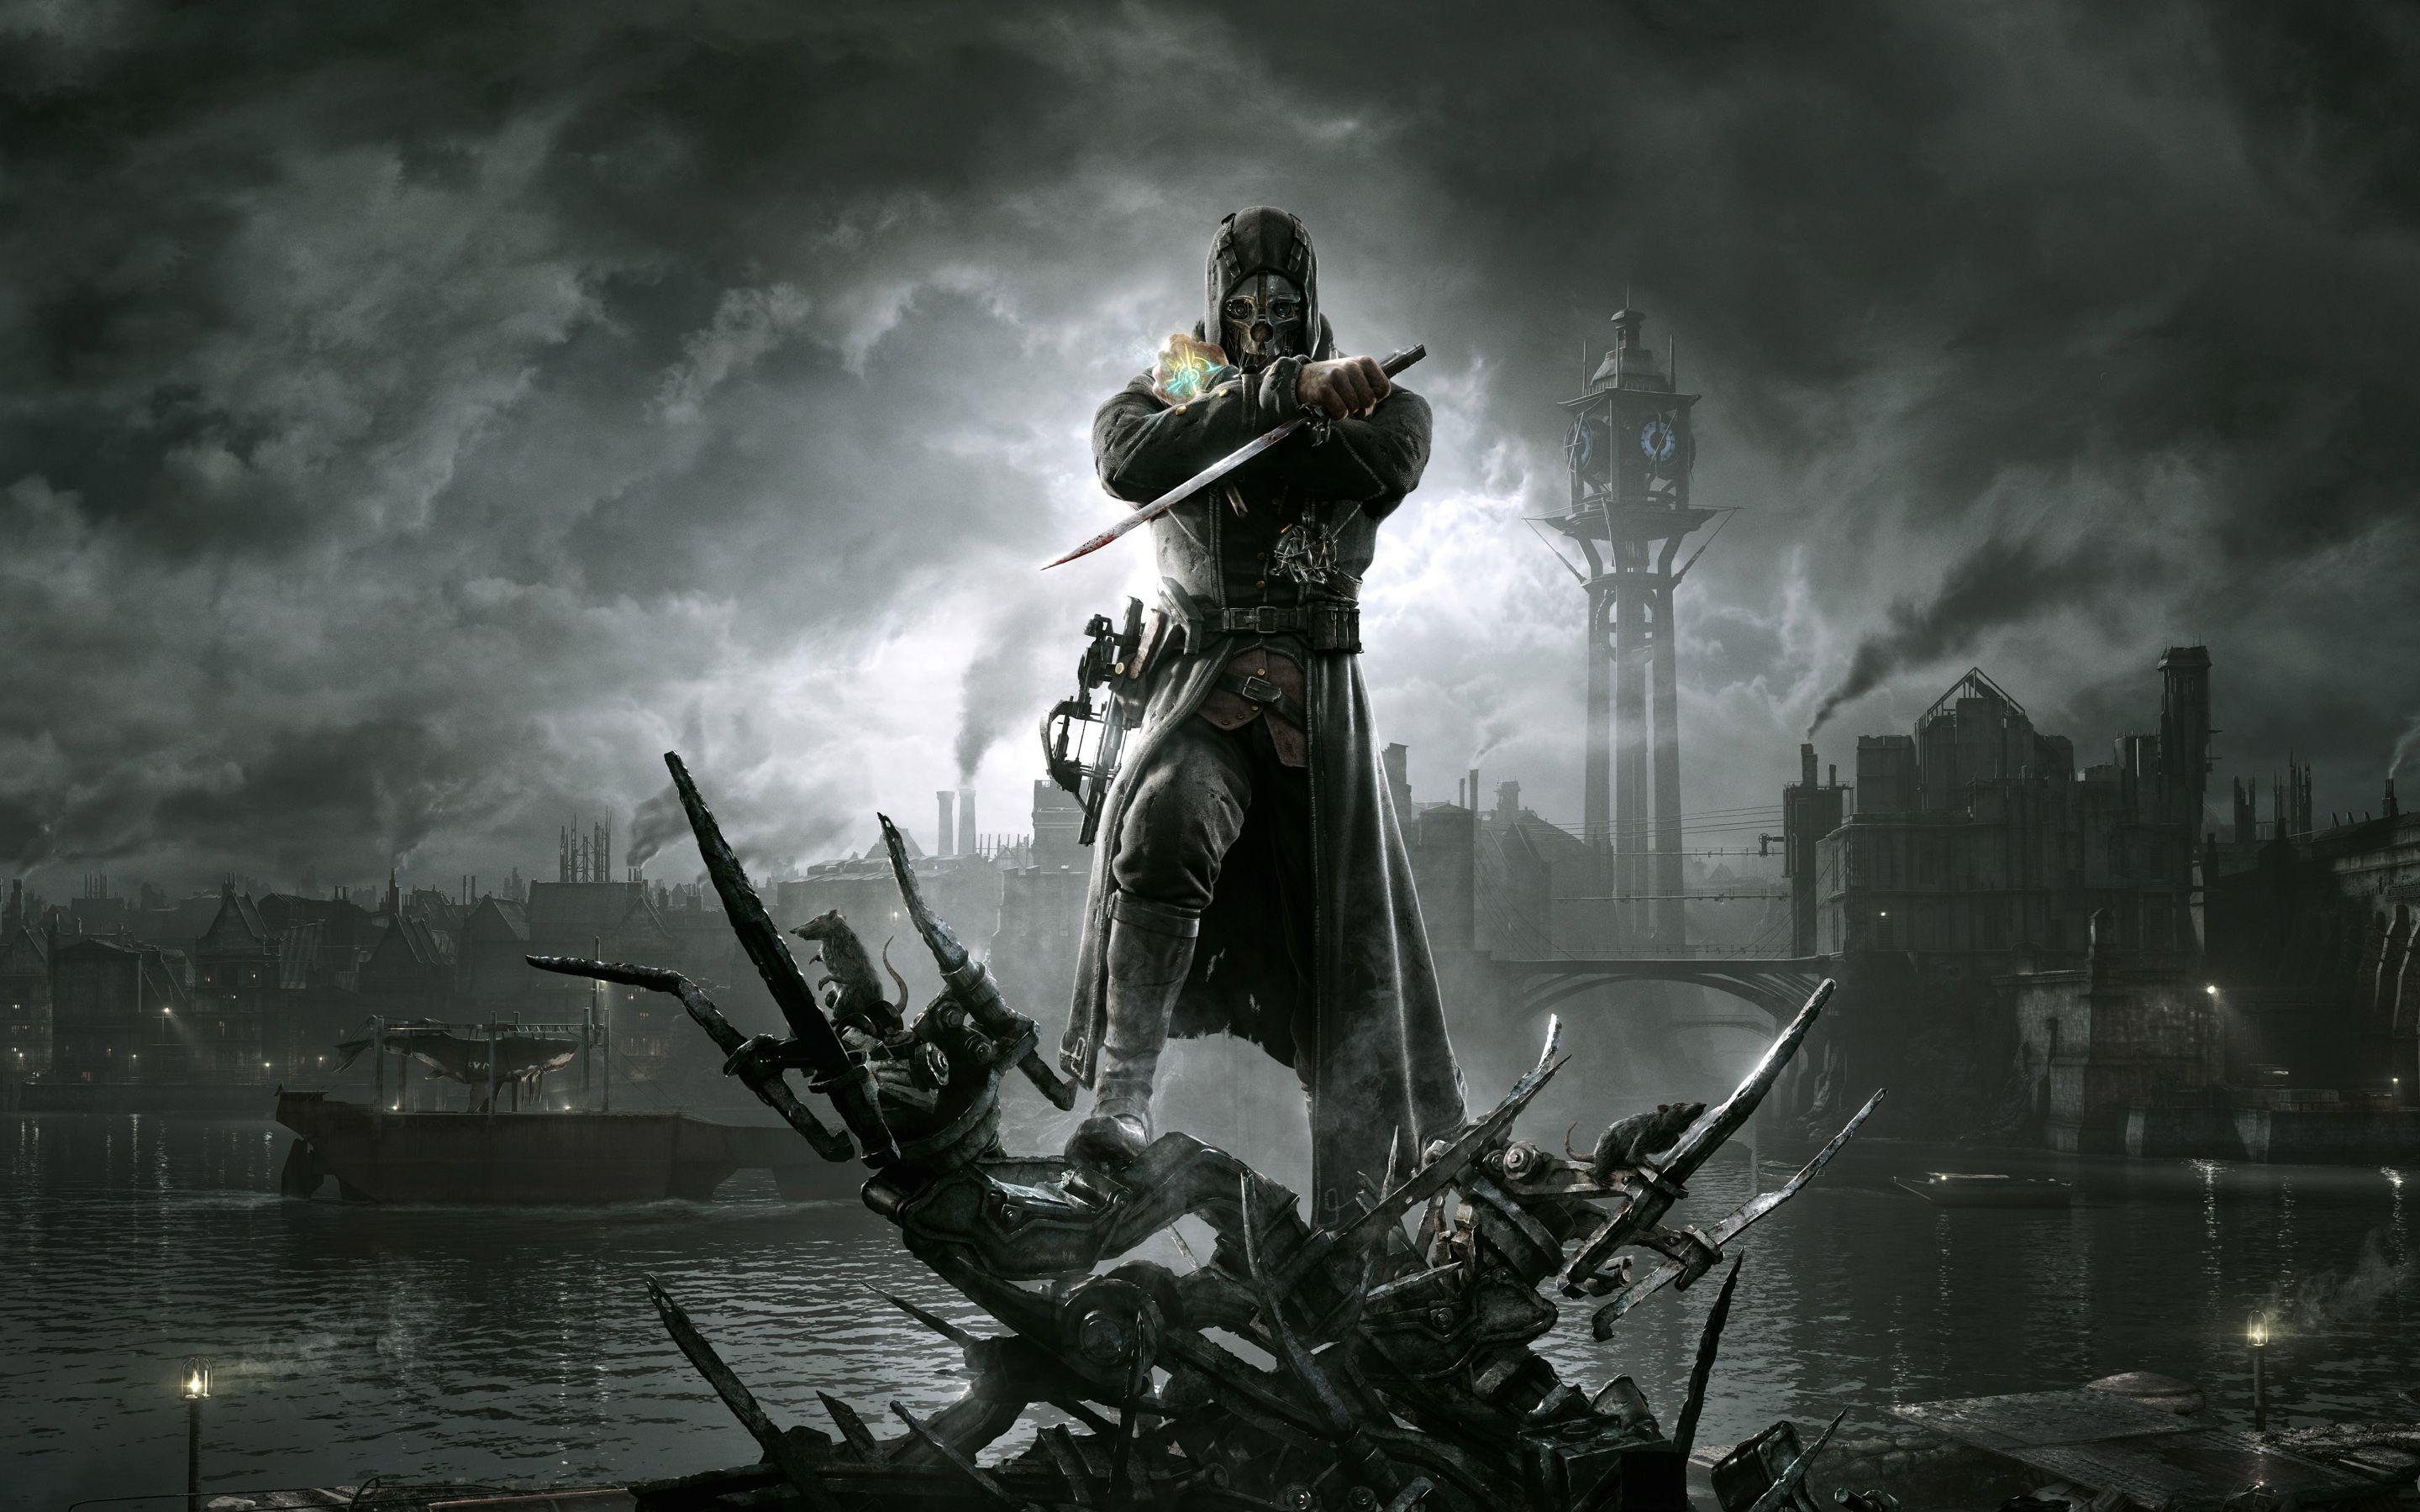 Dishonored Wallpaper Free Dishonored Background